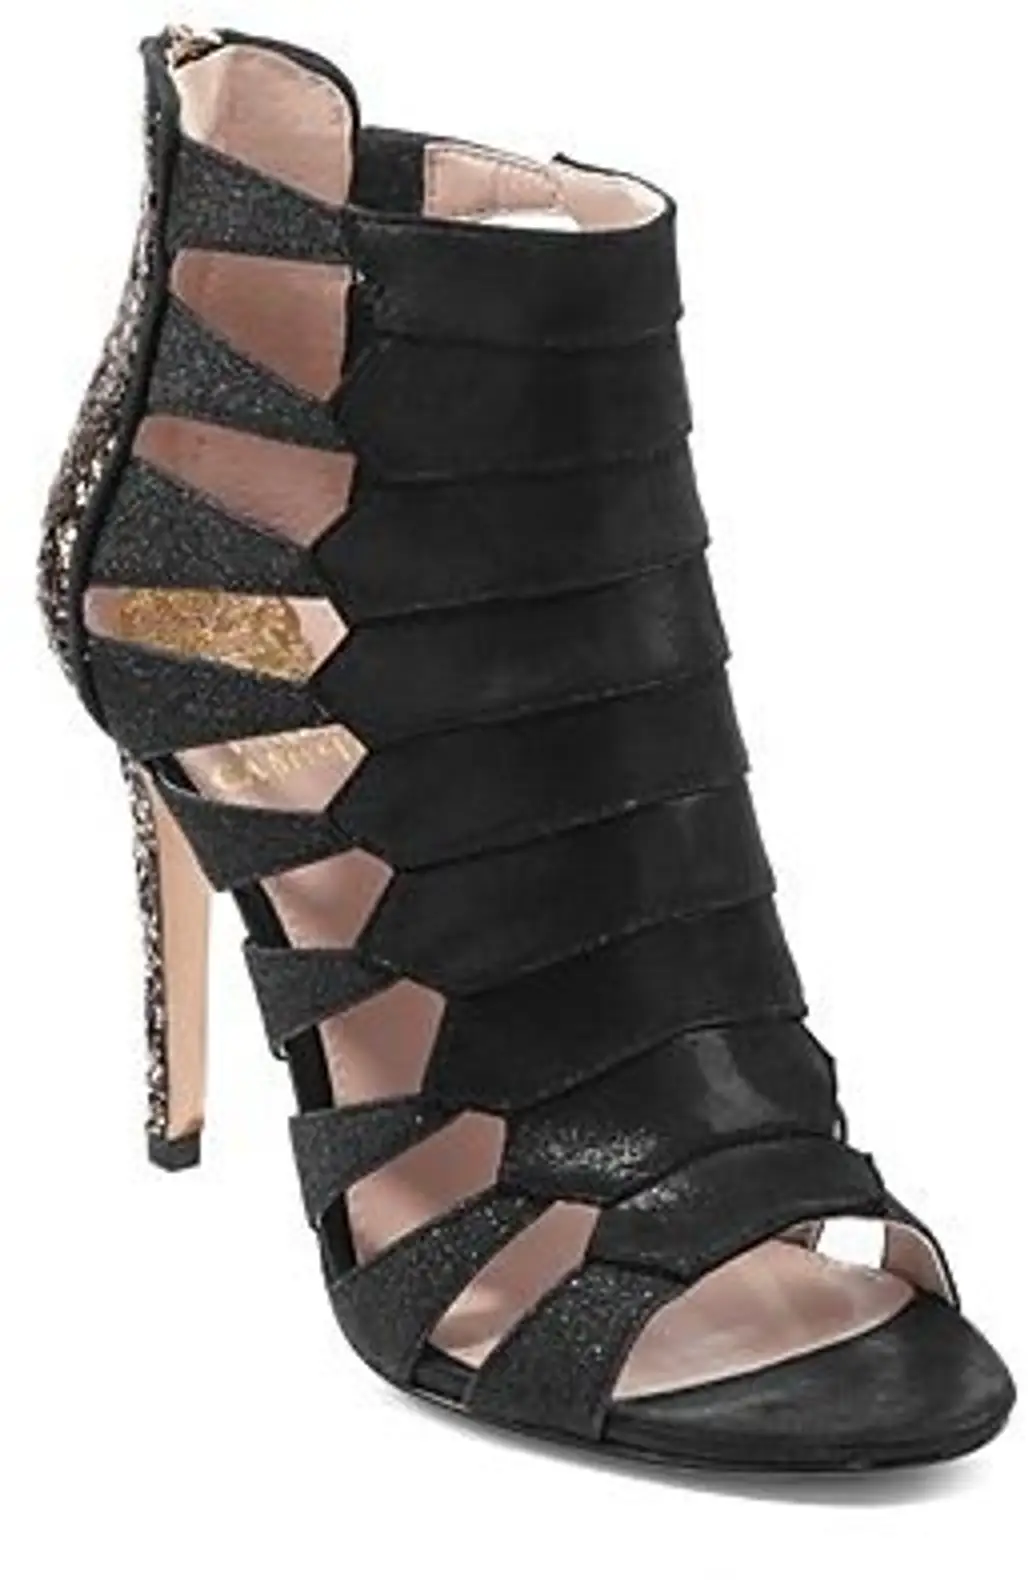 Vince Camuto Strappy Evening Booties